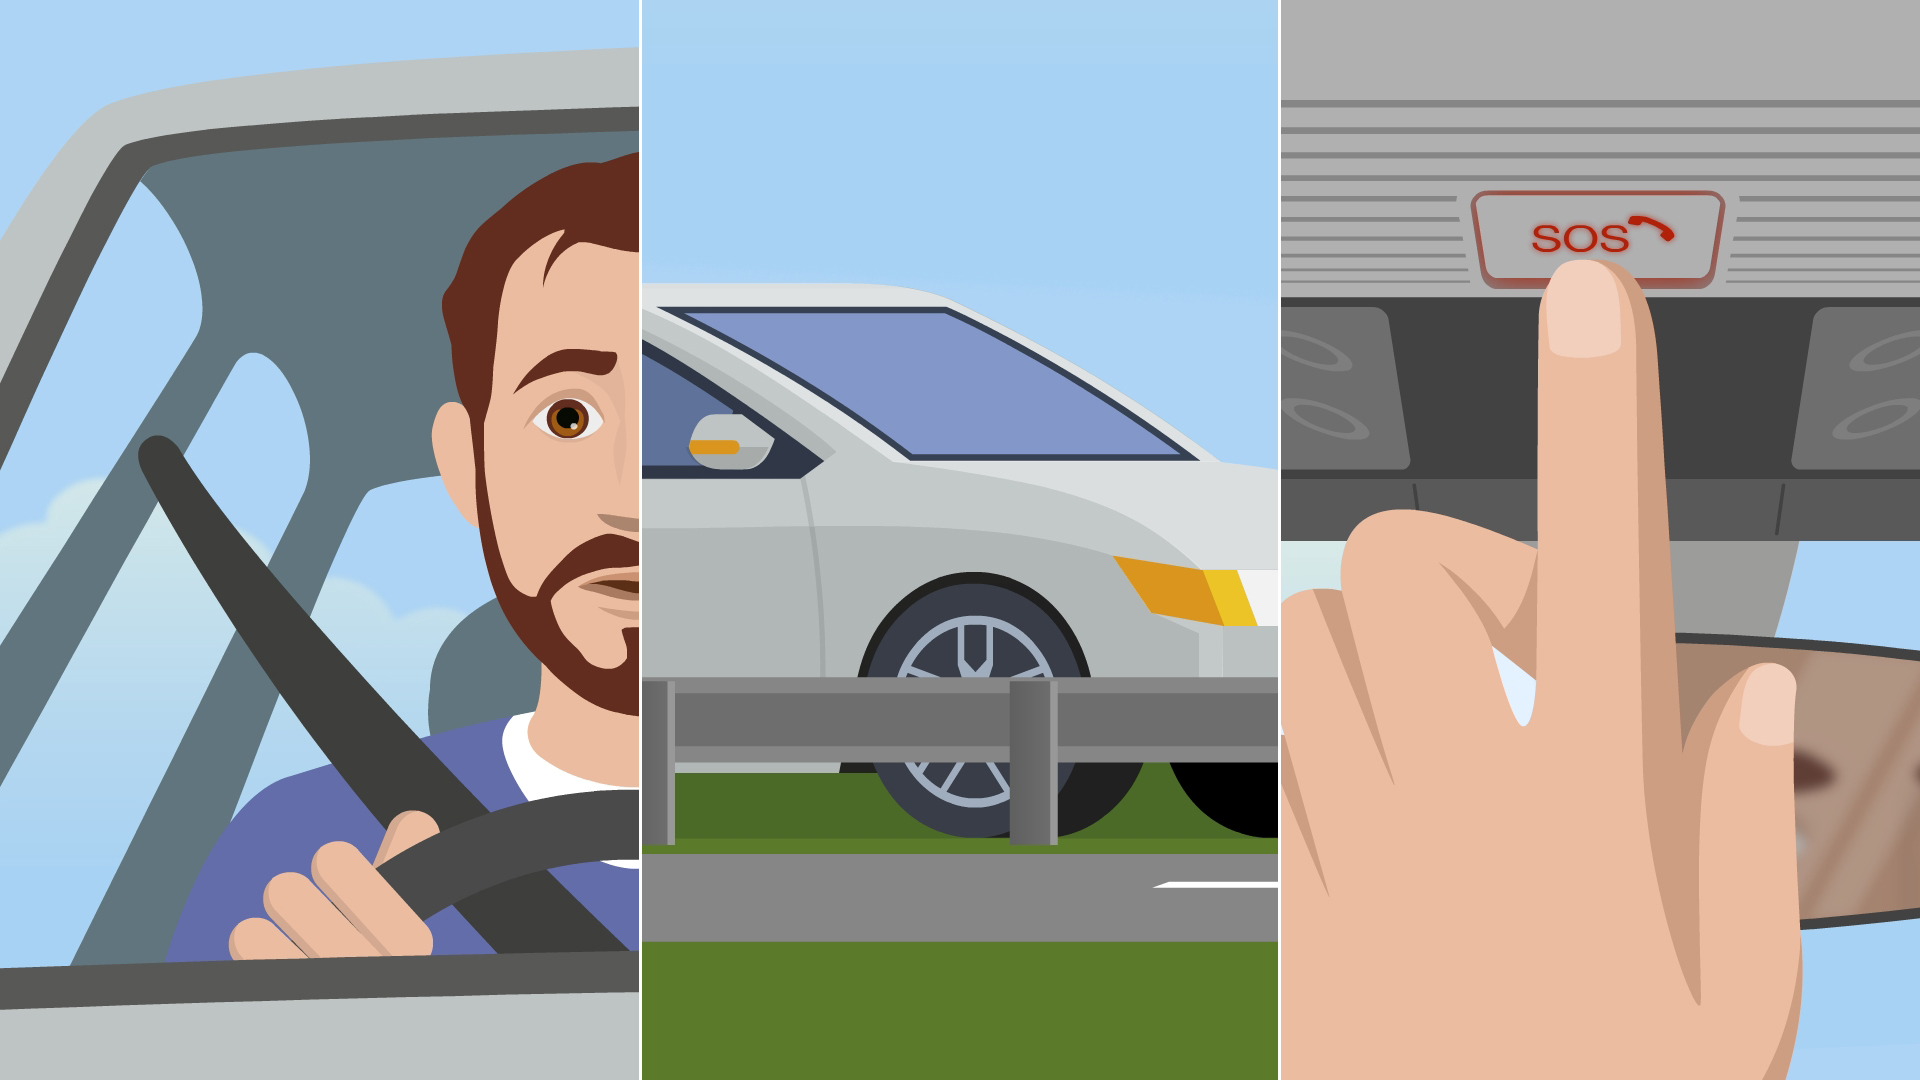 Illustration divided into 3 parts showing driver with his seatbelt on, a stationary car and a finger pressing the eCall SOS button